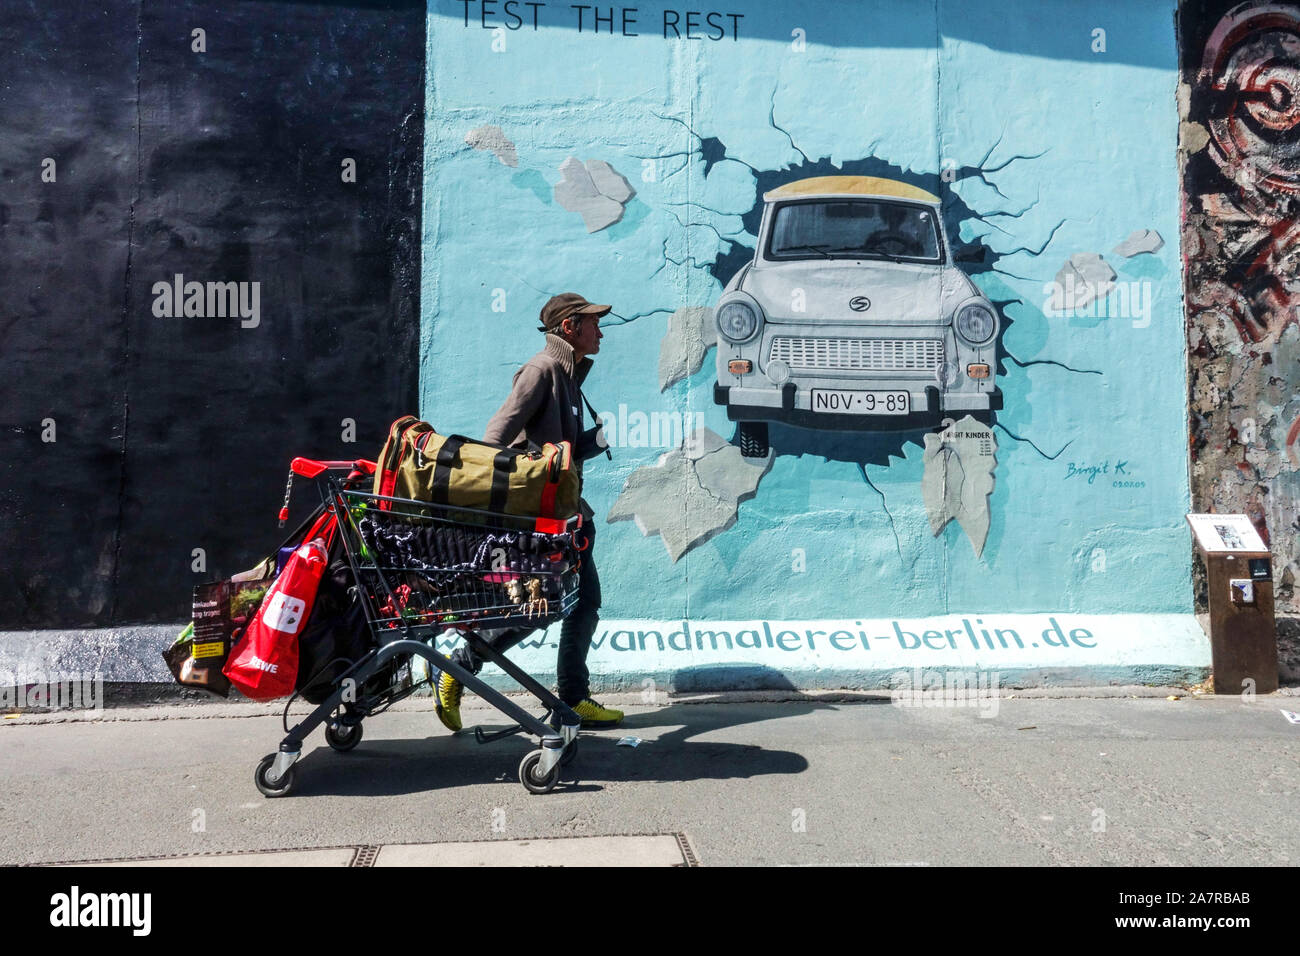 Berlin wall graffiti Migrant Homeless or Economic tourist with supermarket trolley passing around Trabant car in East Side Gallery Germany Stock Photo